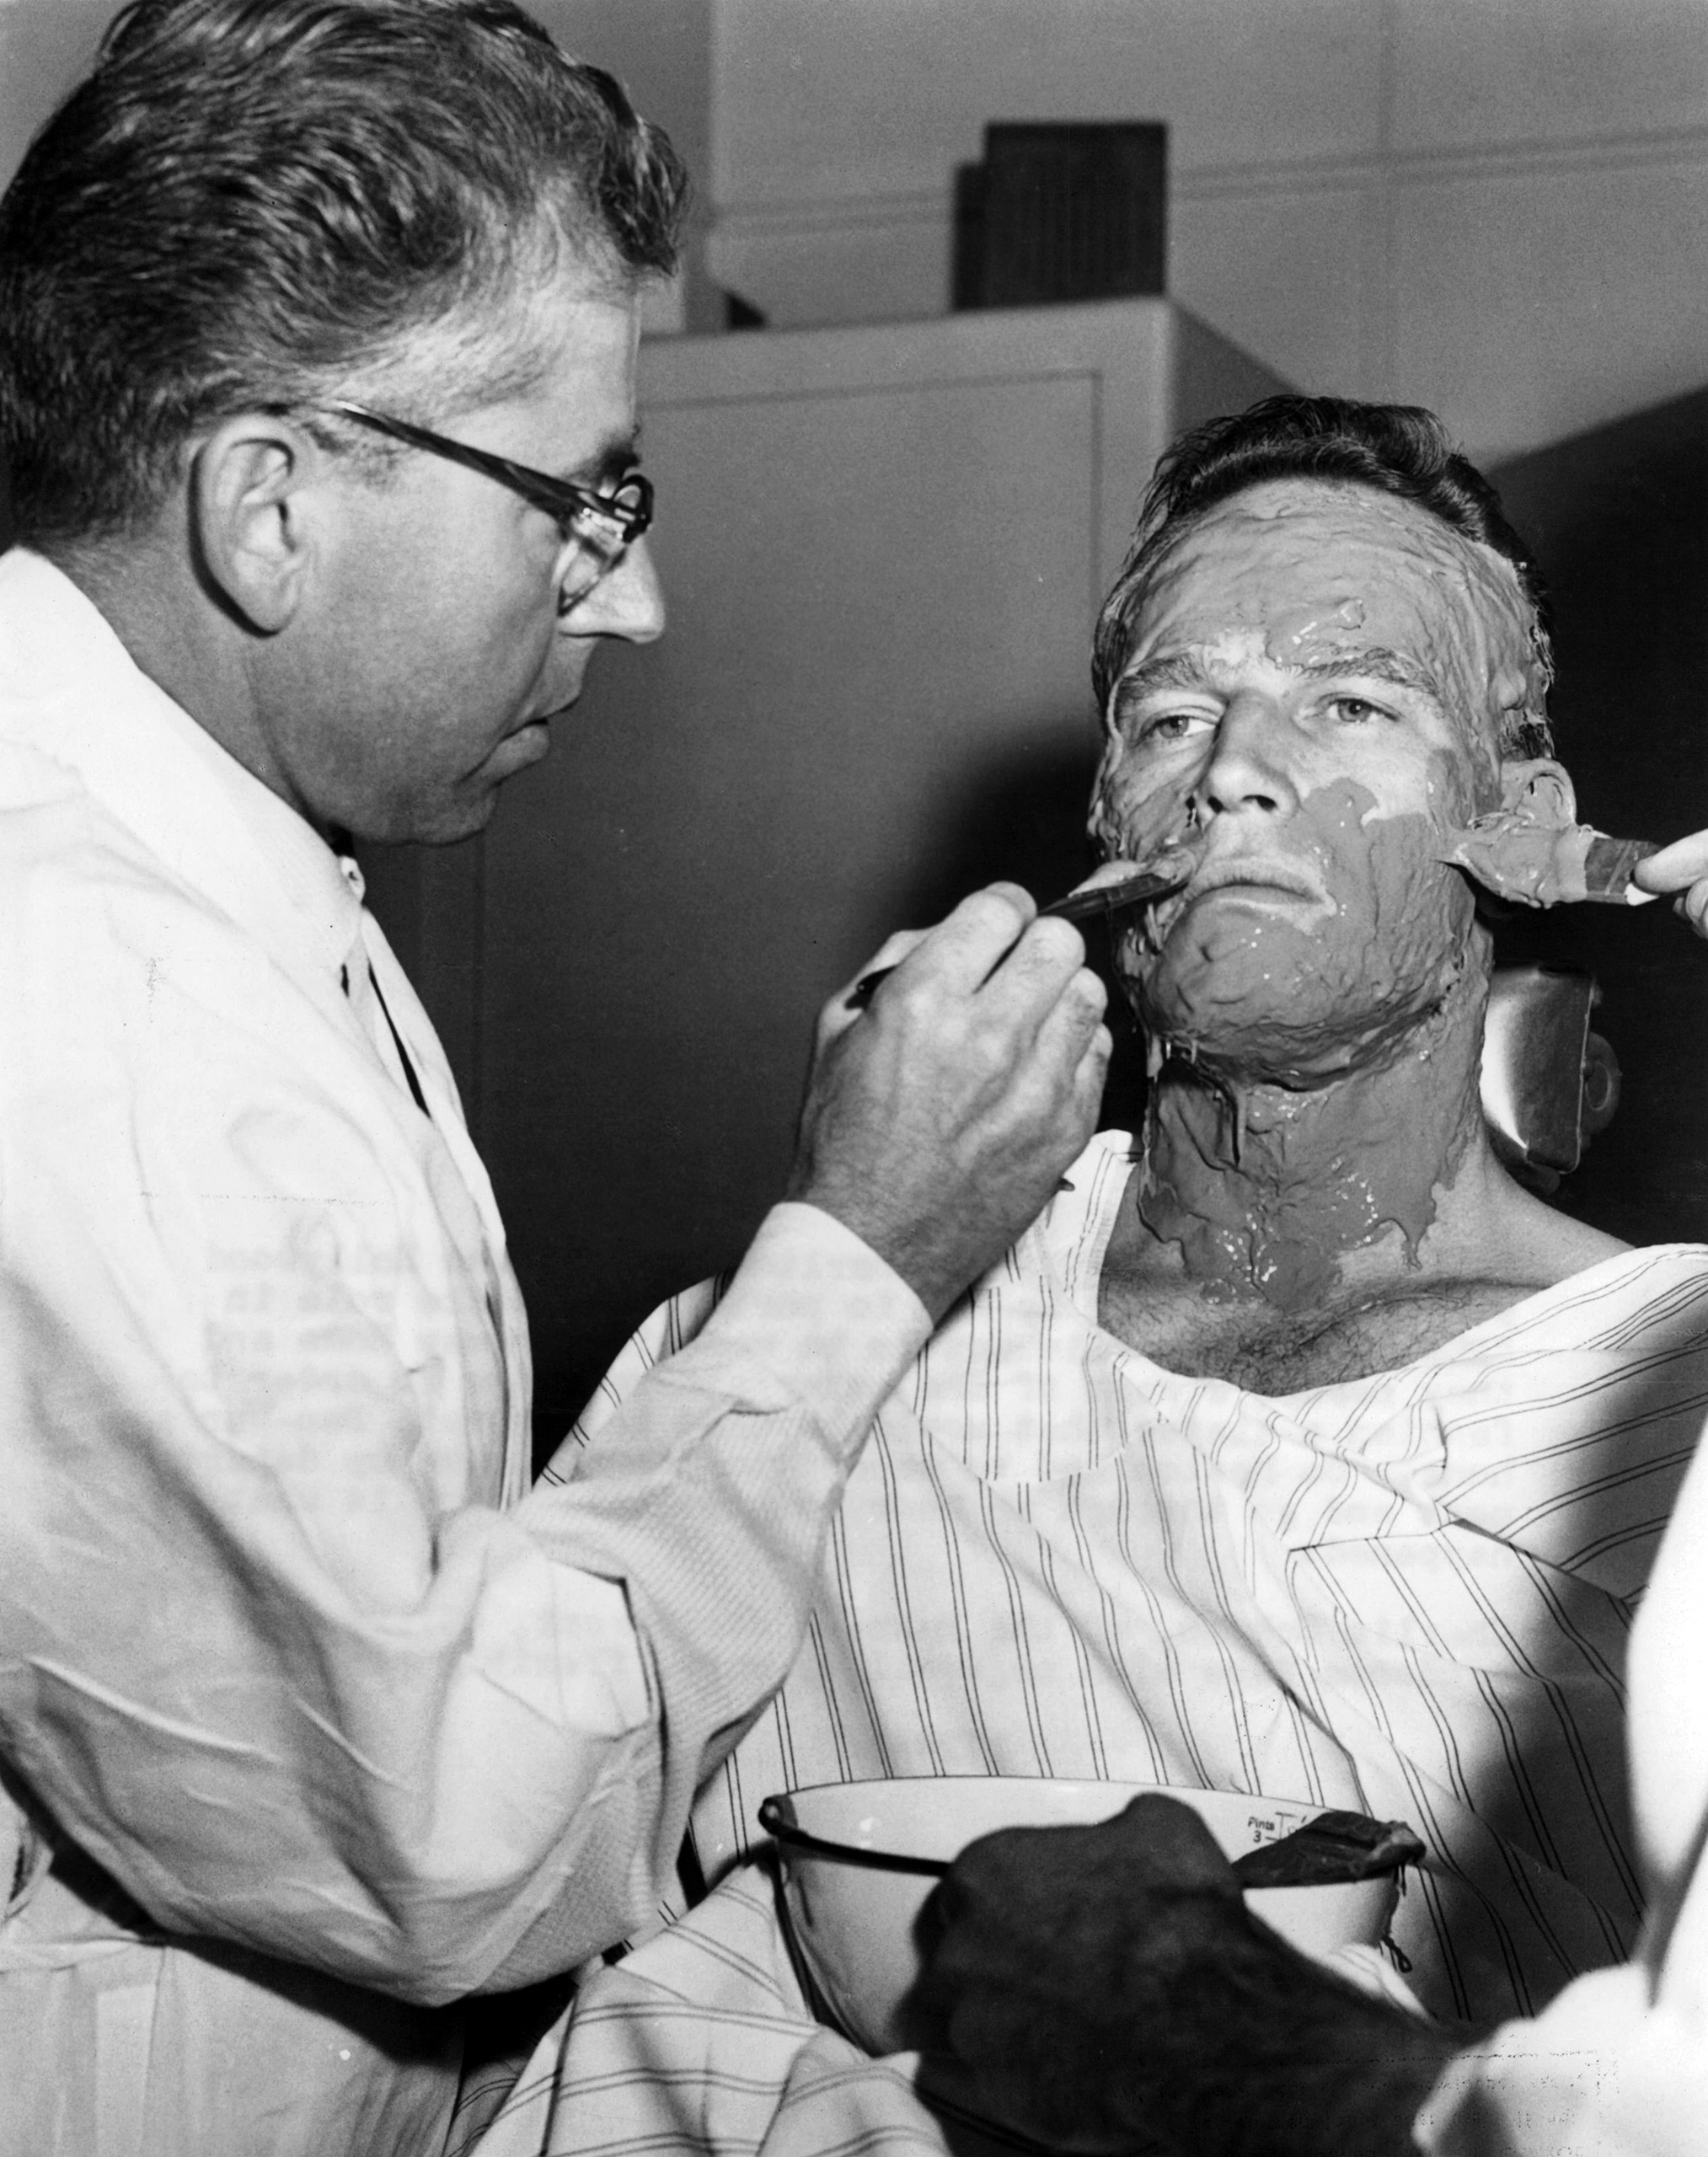 Charlton Heston begins to get his face cast in publicity portrait from the film Ben-Hur 1959.